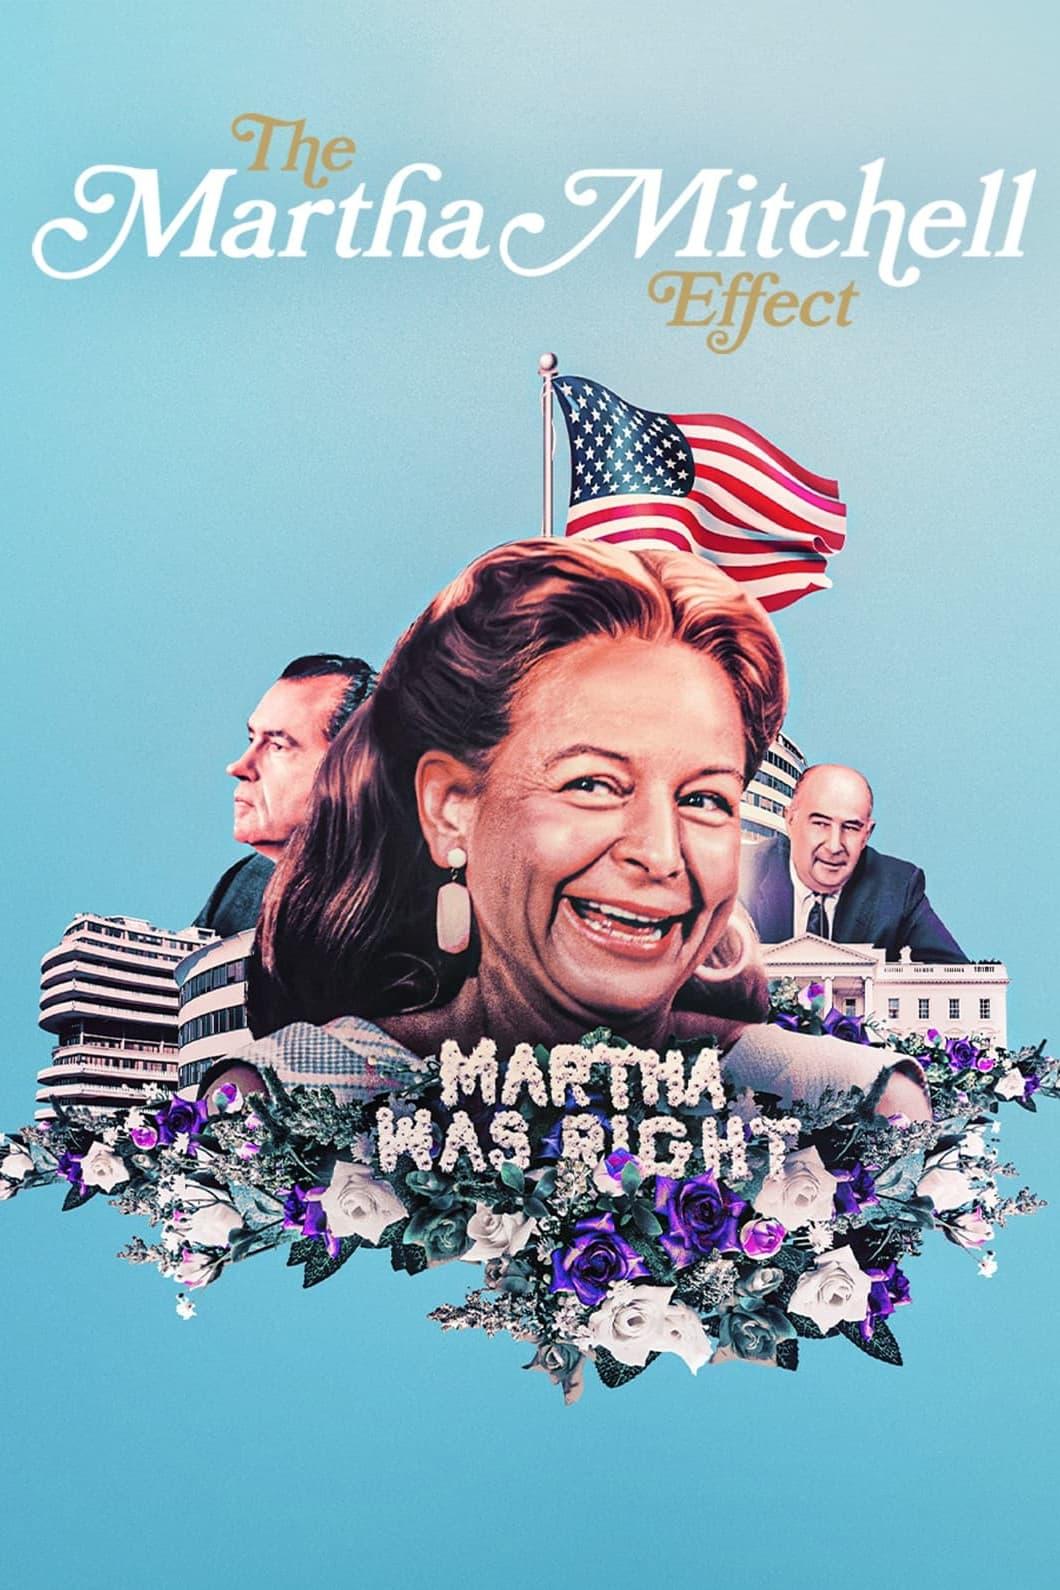 The Martha Mitchell Effect poster